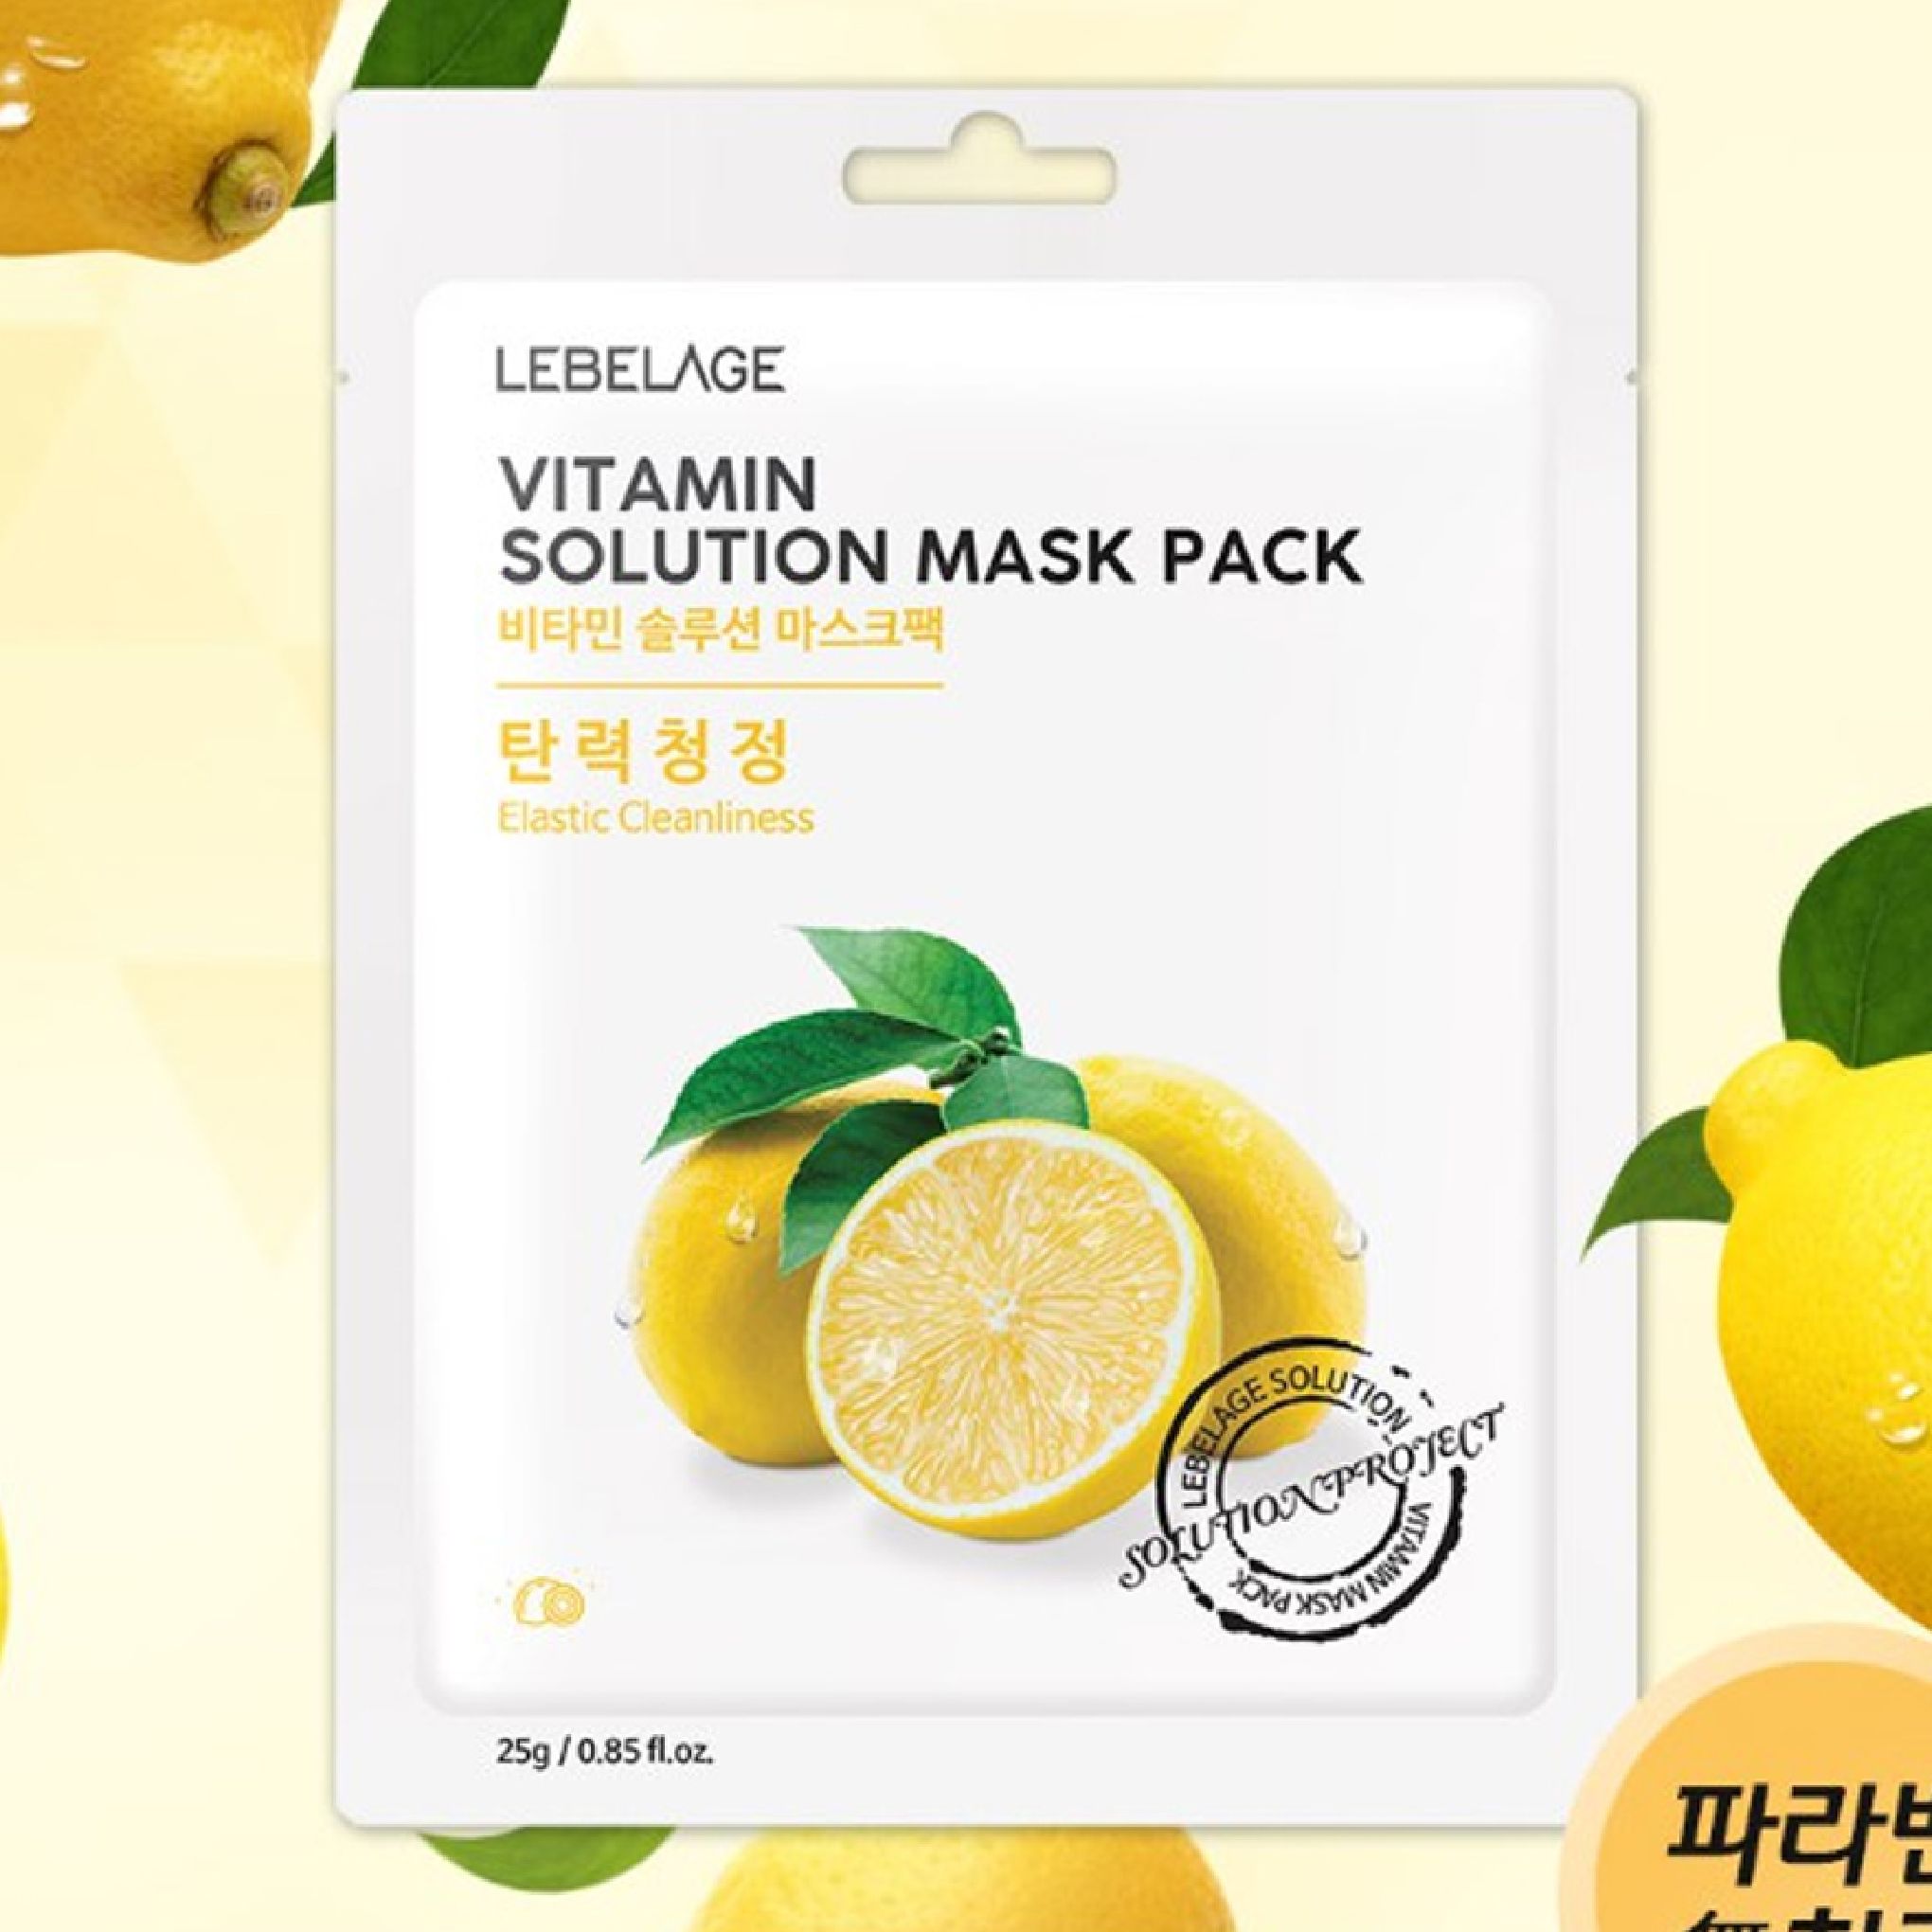  Mặt Nạ Lebelage Vitamin Solution Mask Pack Elastic Cleanliness Chiết Xuất Từ Chanh 25g 